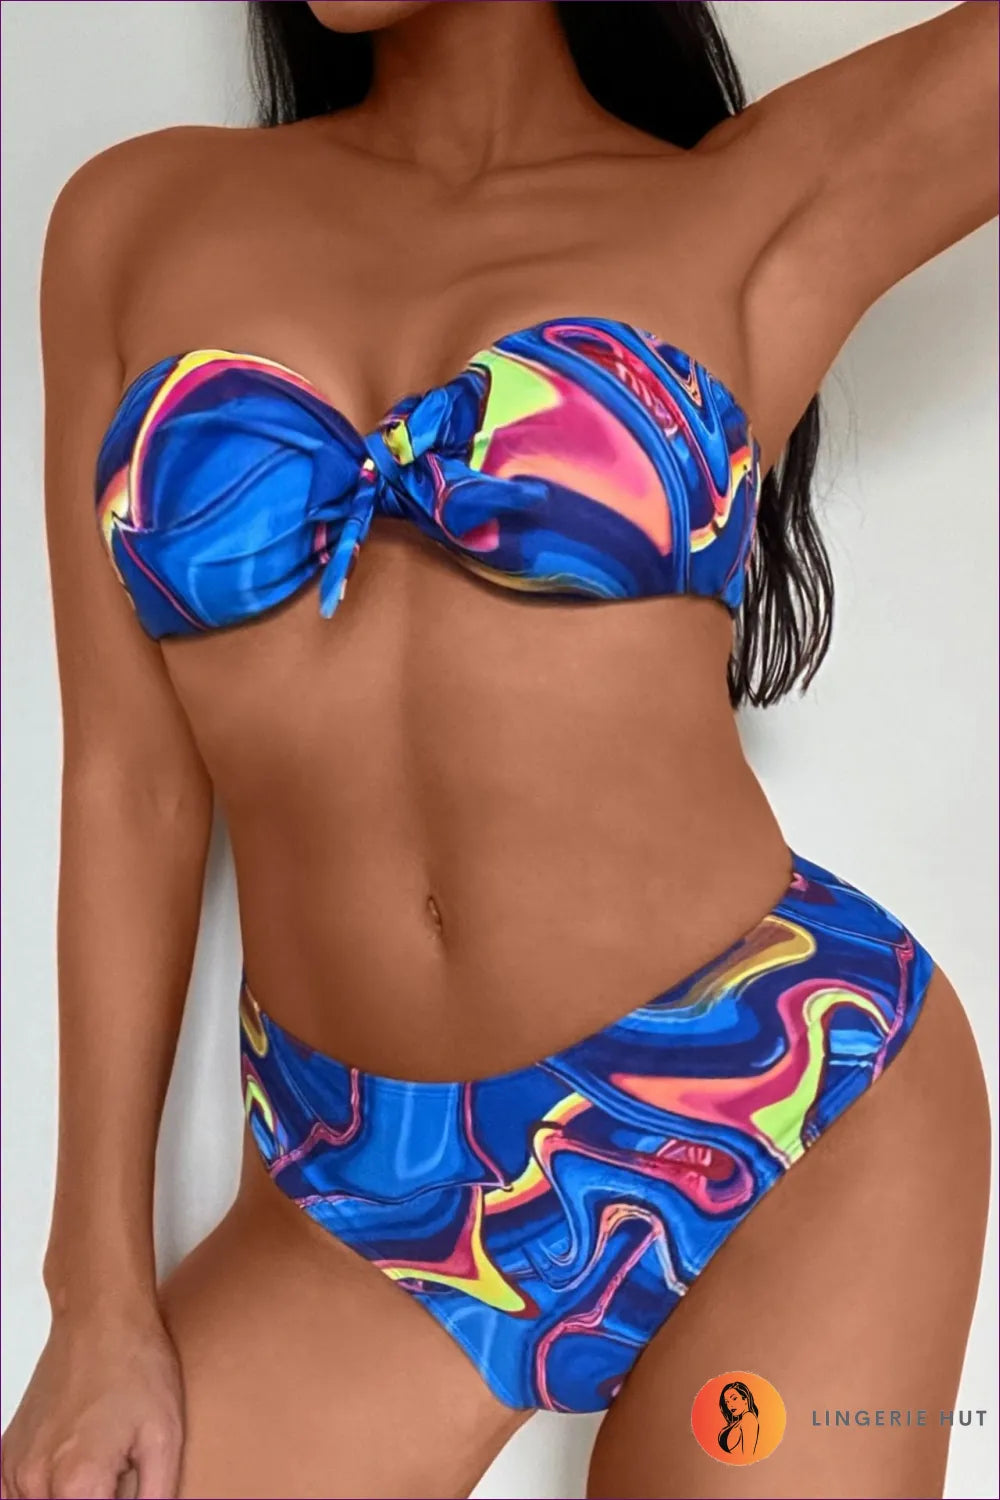 Elevate Your Beach Style With Our Exquisite Split Multi-color Printed Bikini. Designed To Make a Statement,